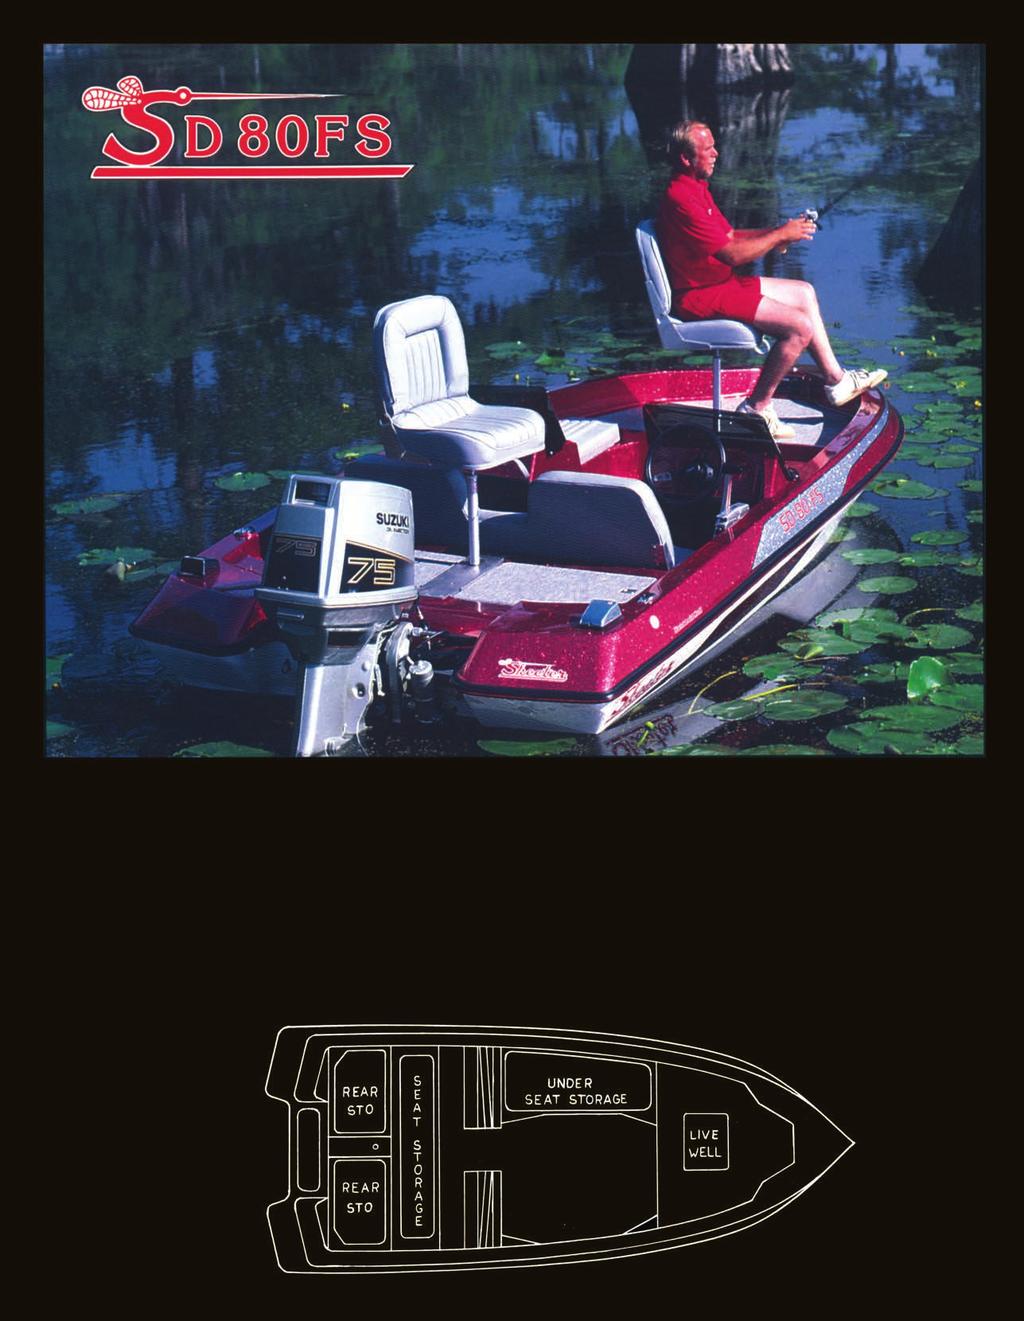 All the SD features combined with a low profile ski design make the SD80FS one of the most affordable and best all round small fish n ski boats available today.